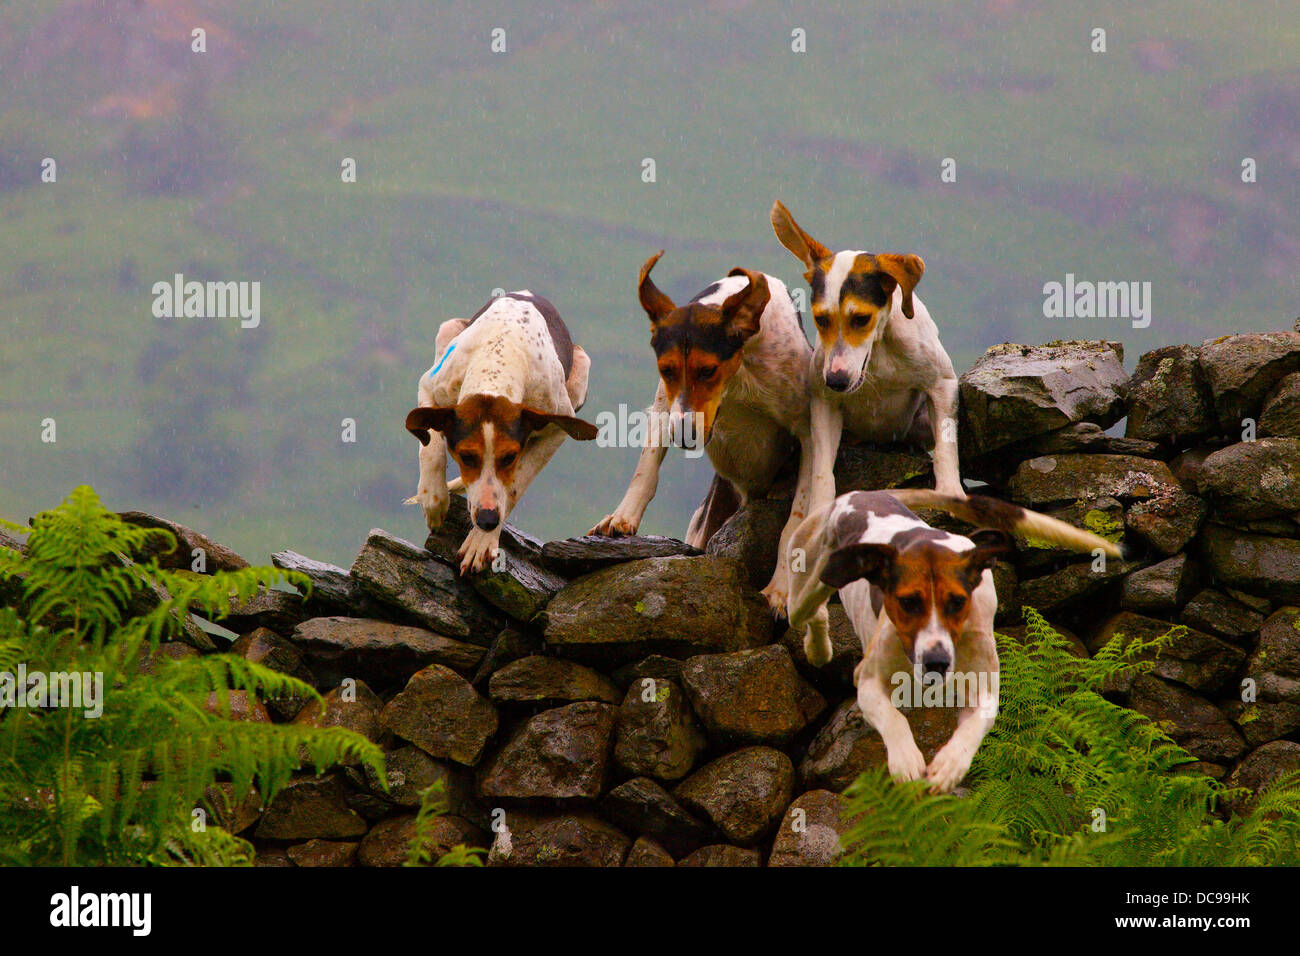 Trail Hounds jumping over a dry stone wall Ambleside Sports in The Lake District, Cumbria, England, UK Stock Photo